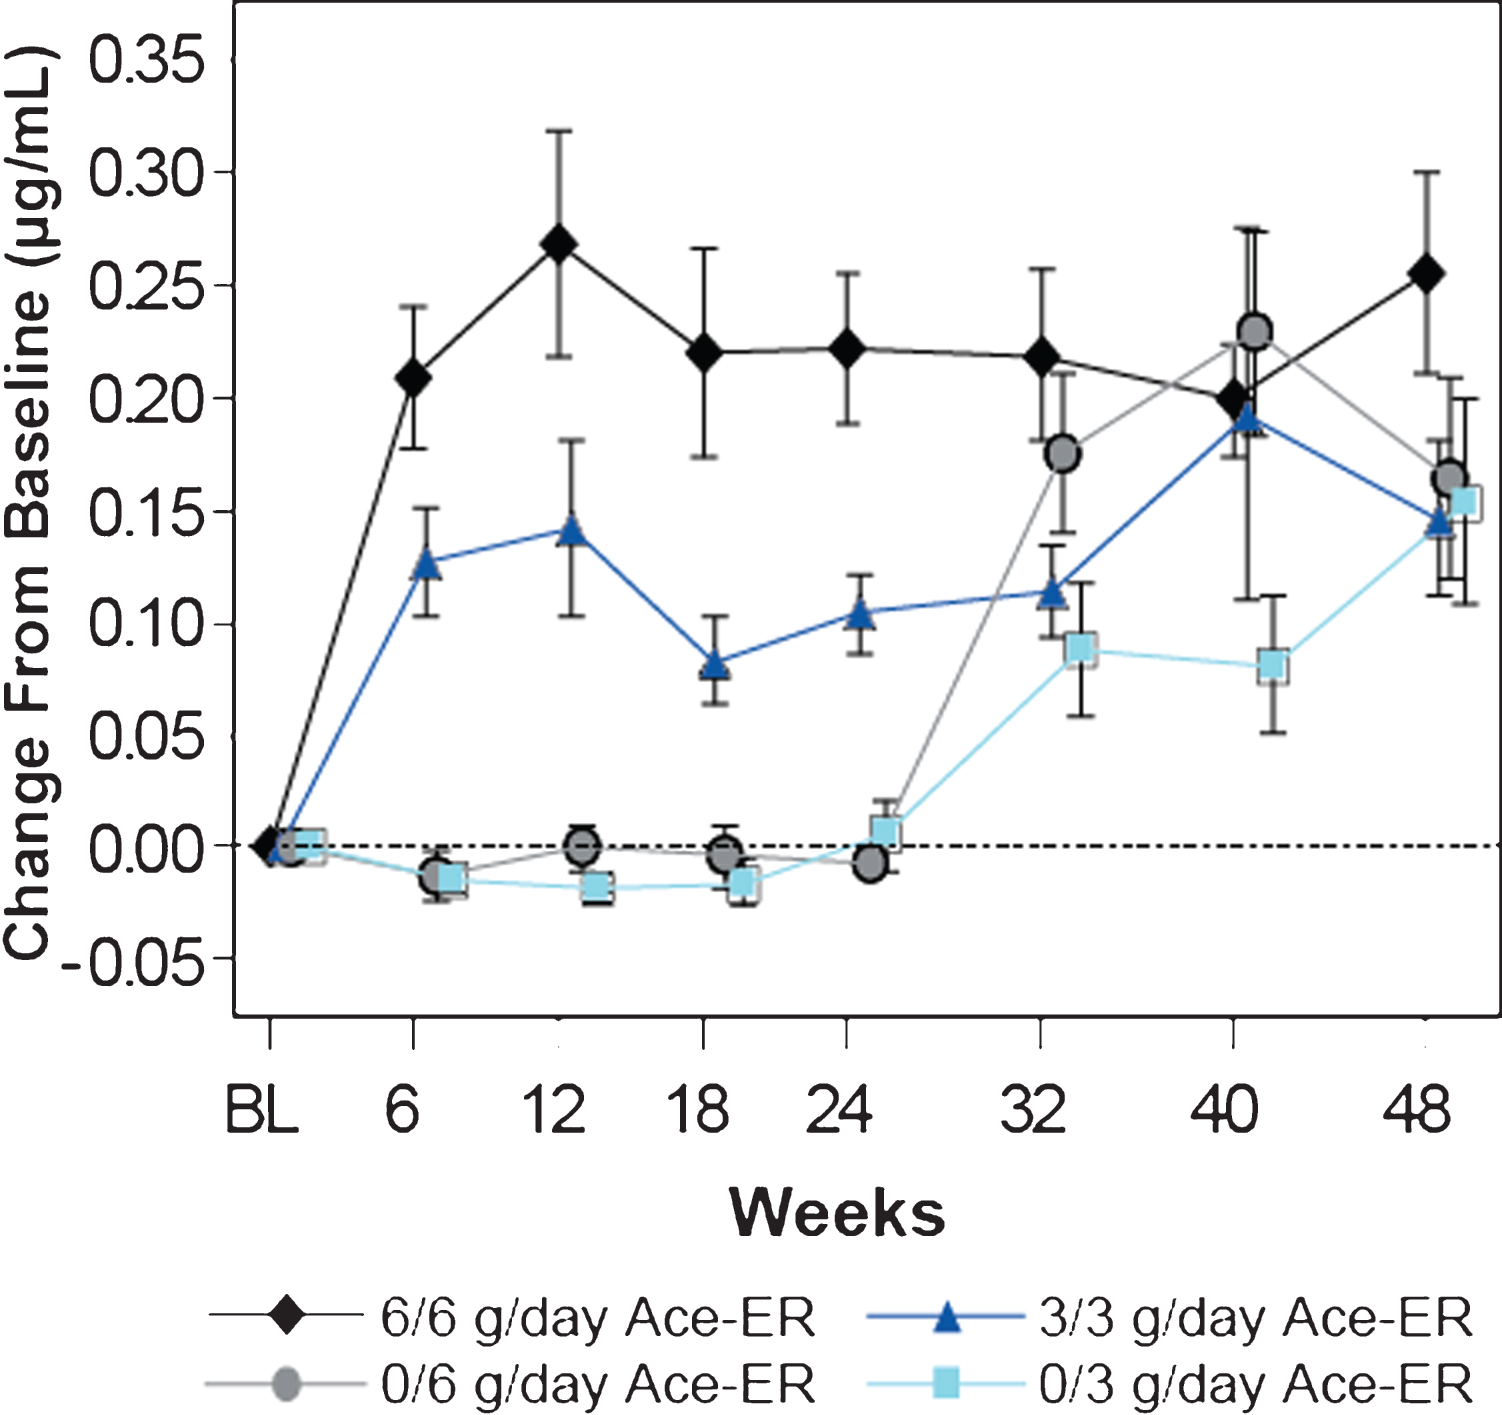 Dose-dependent Increases in Mean (±SE) Free SA Levels in Serum. Serum free SA levels were measured by LS/MS/MS and are presented as the mean change (±SE) from baseline in μg/mL. Dose dependent increases in SA were observed over time. At 24 weeks, the placebo groups crossed over to the 6 g/day and 3 g/day groups (designated as 0/6 g/day and 0/3 g/day, respectively).